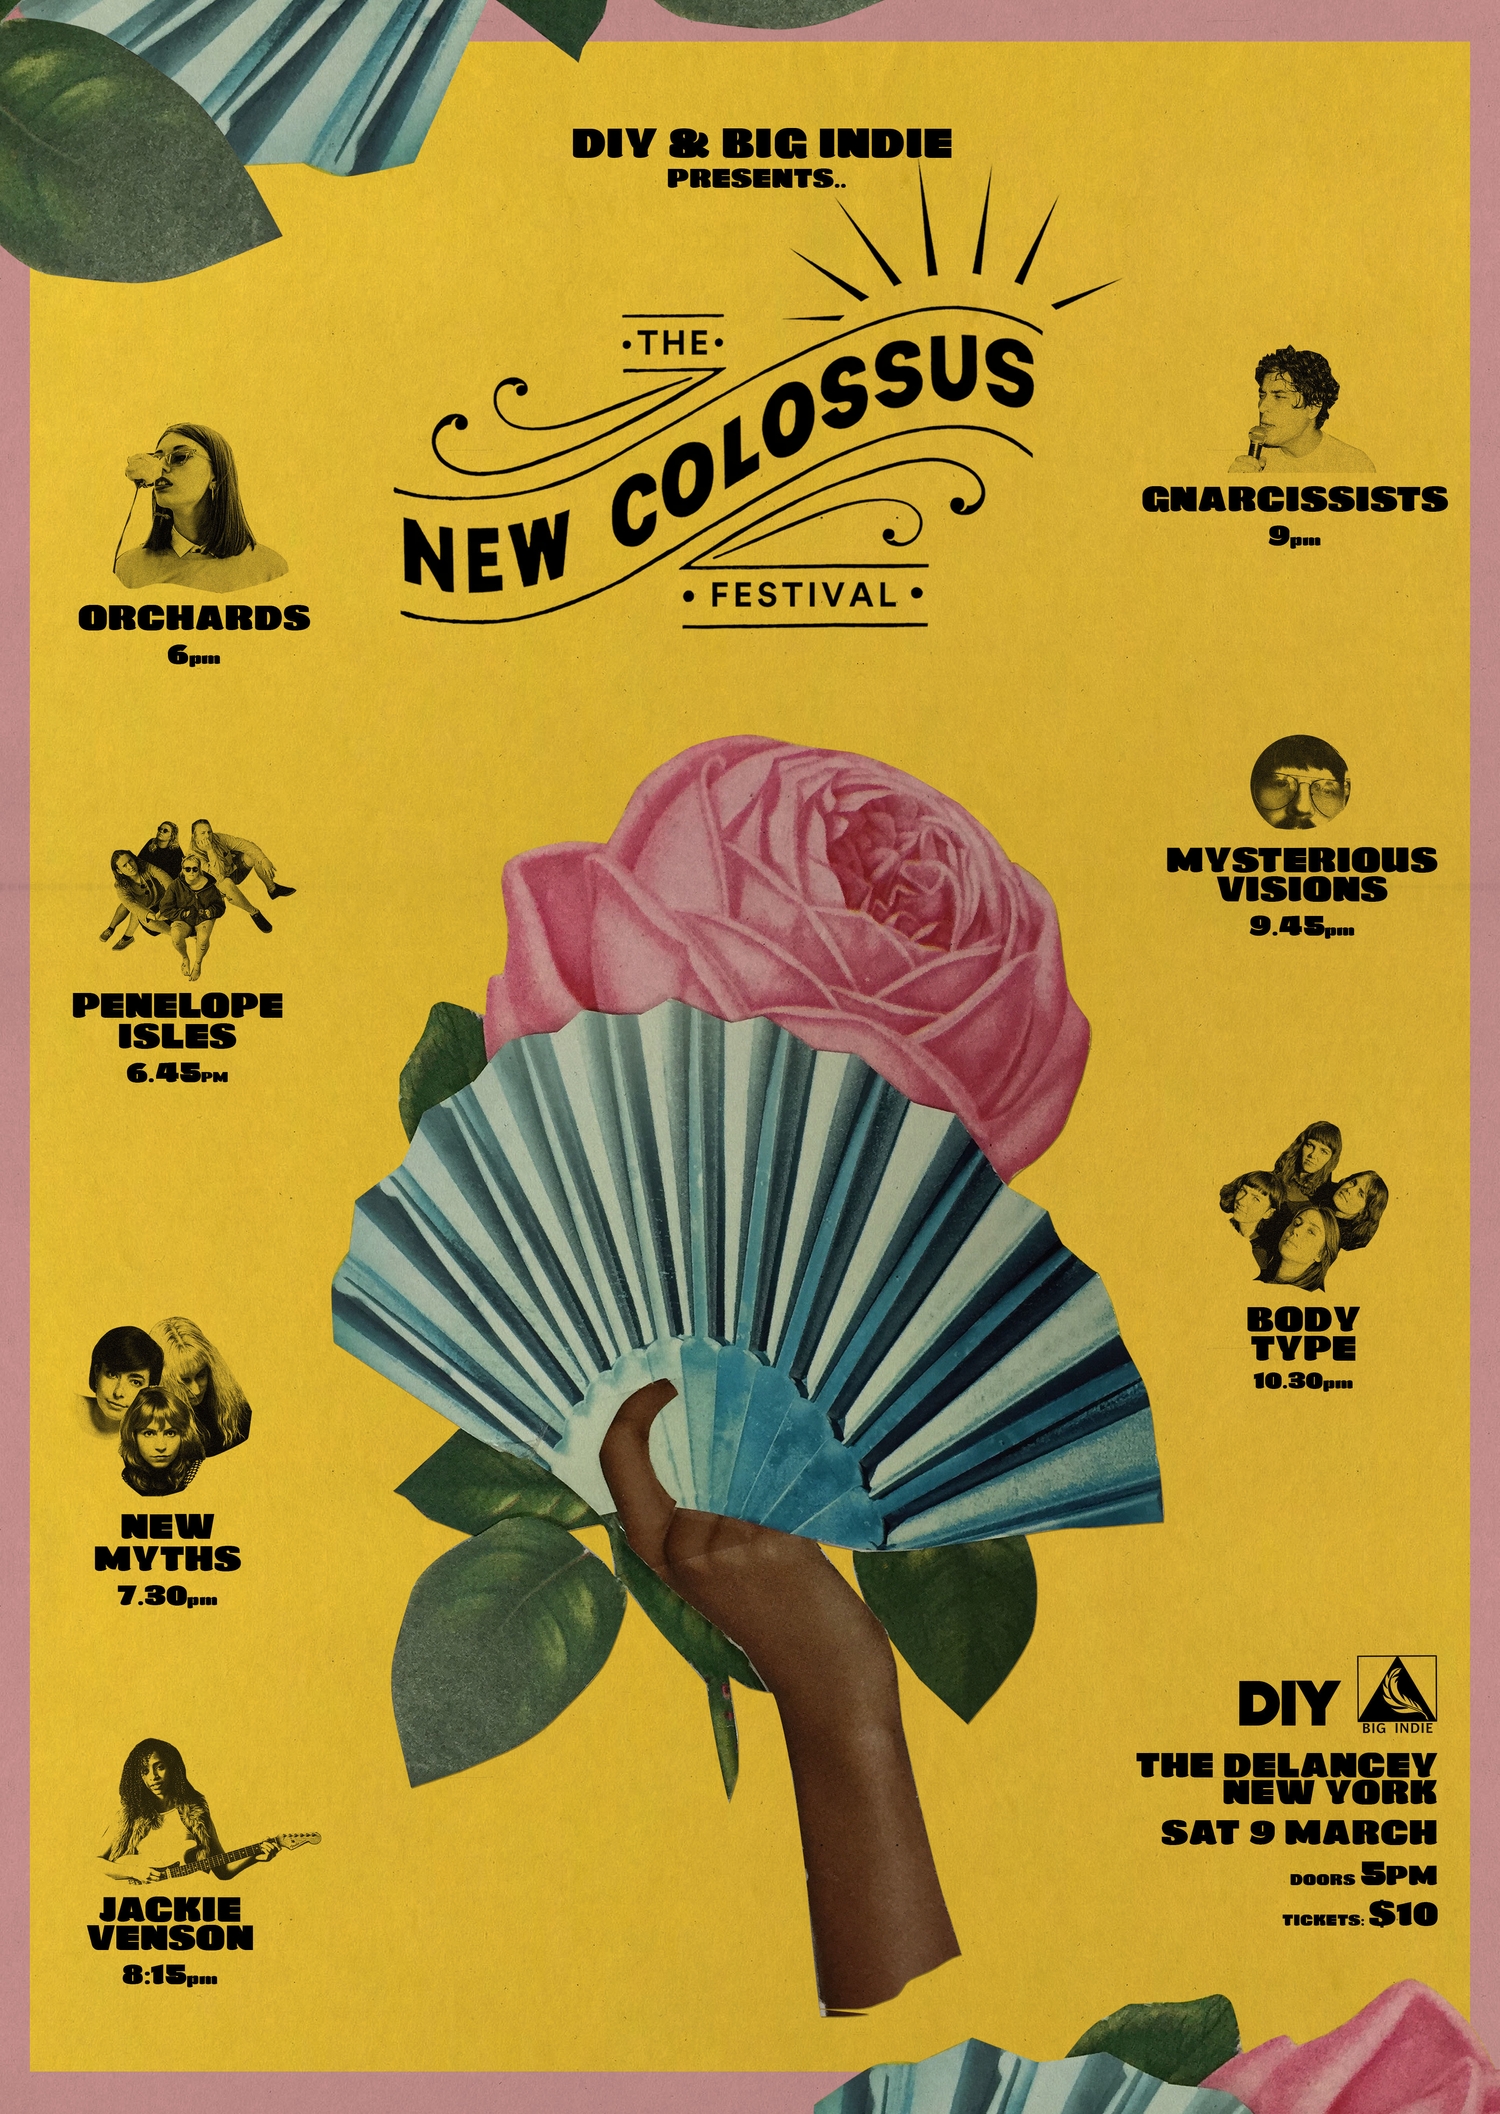 Whenyoung, Body Type, Penelope Isles and more to play the DIY/ Big Indie stage at New York's New Colossus next month